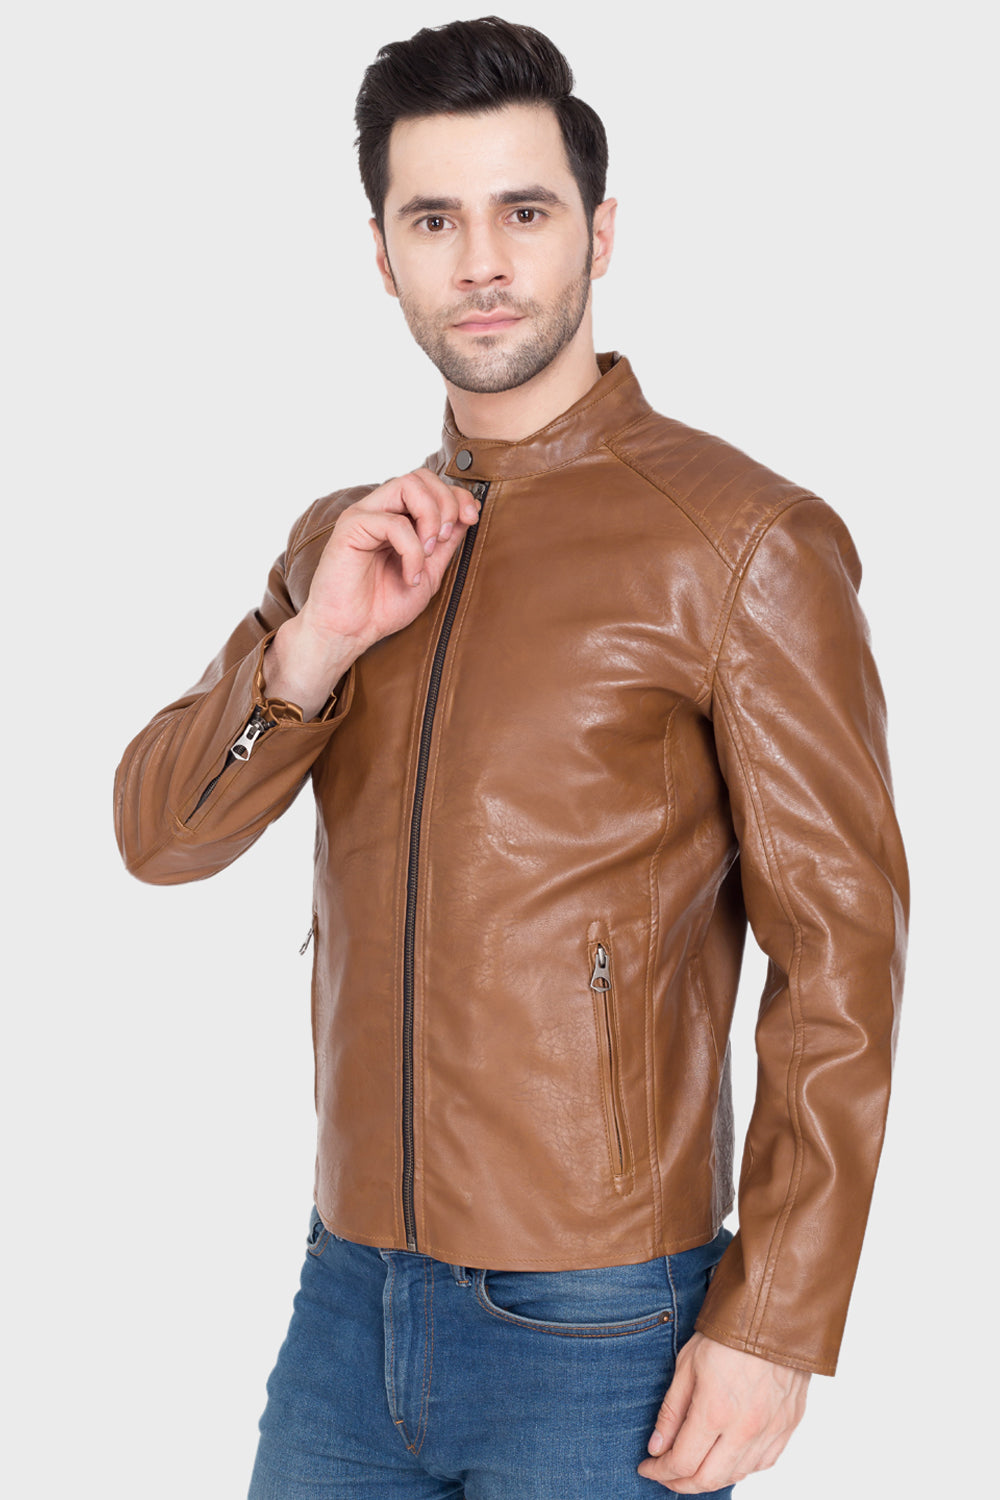 Justanned Front Zip Leather Jacket